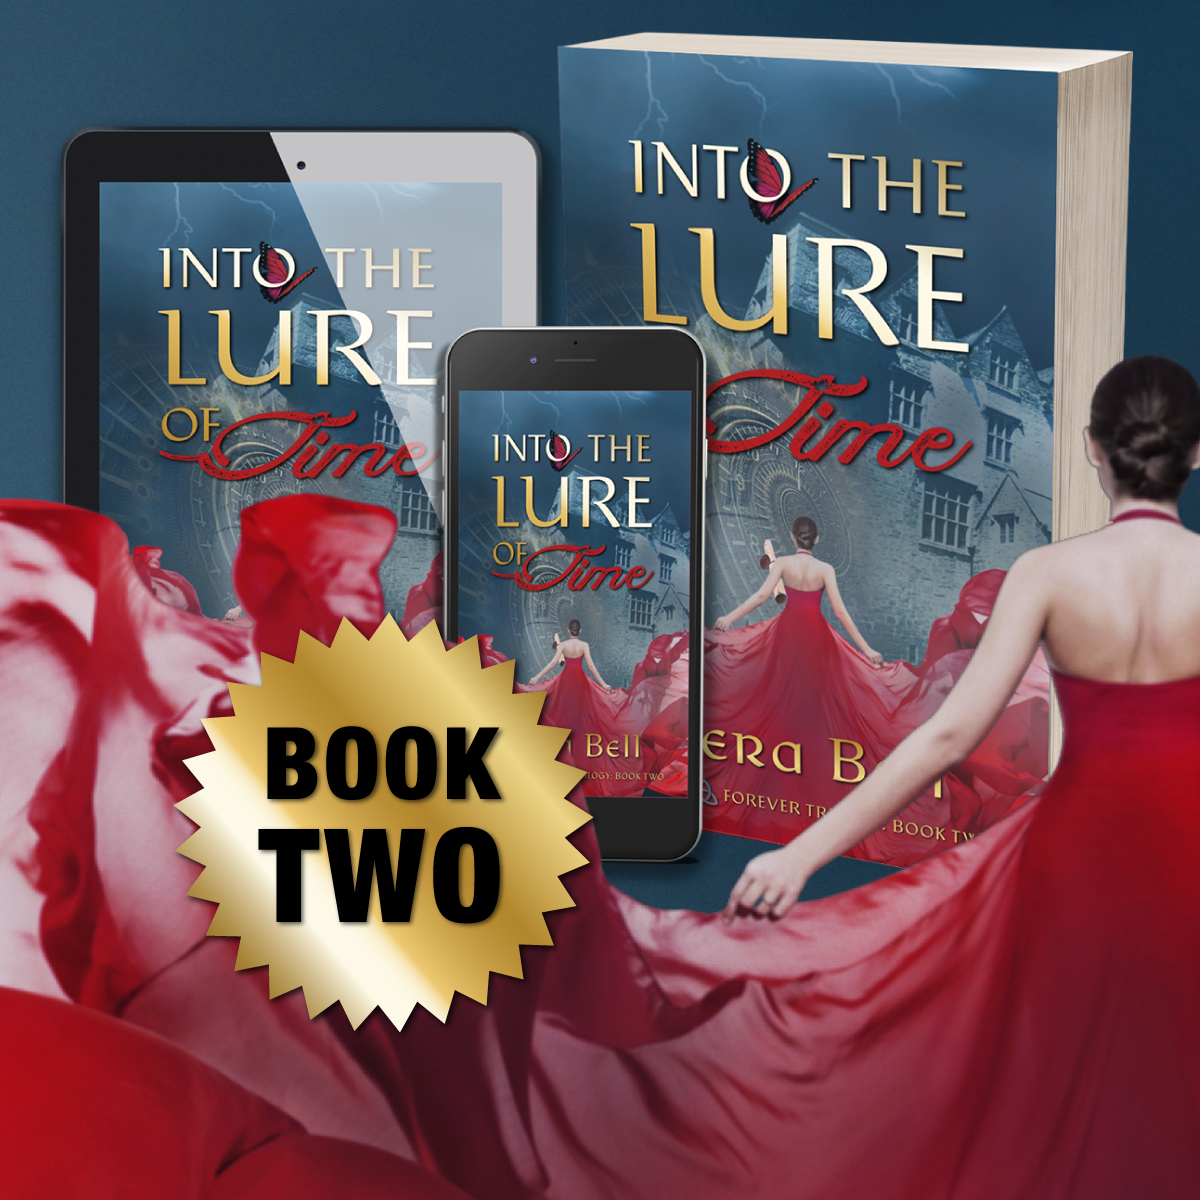 ⏳⏳⏳OUT NOW!⏳⏳⏳

Love #timetravel #romance w/ dark undertones & a touch of magic?

Don’t miss INTO THE LURE OF TIME, book 2 in the Always and Forever trilogy, by @VeraBellAuthor! #outnow @XpressoTours 

Get started on it TODAY ➞ bit.ly/4dgZS95